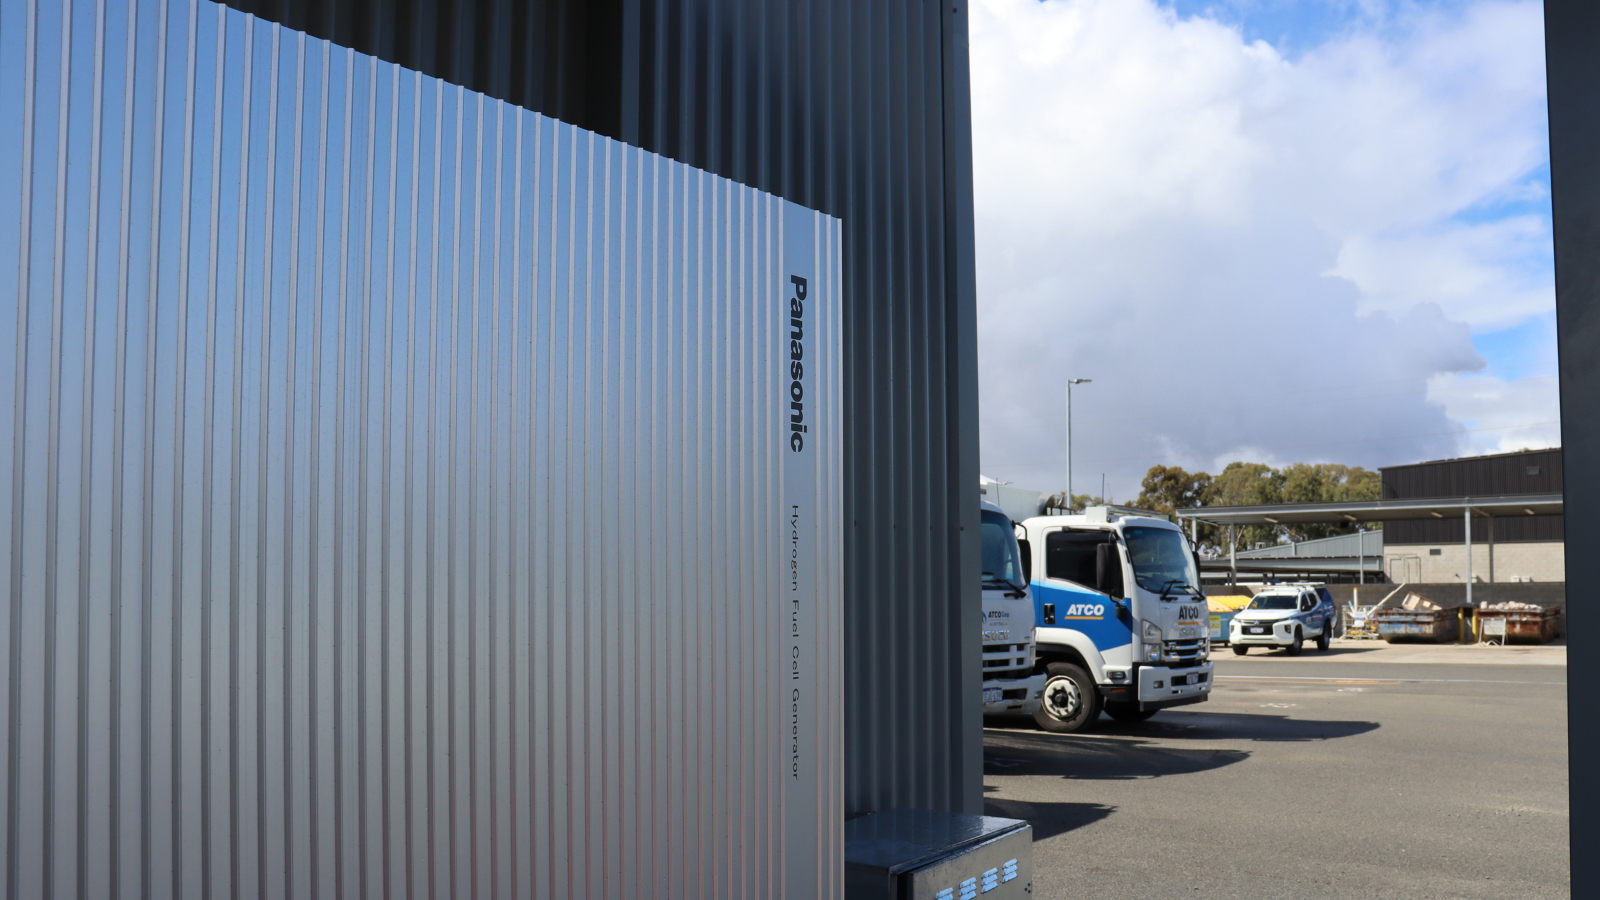 Photo: Hydrogen fuel cell generator installed at CEIH